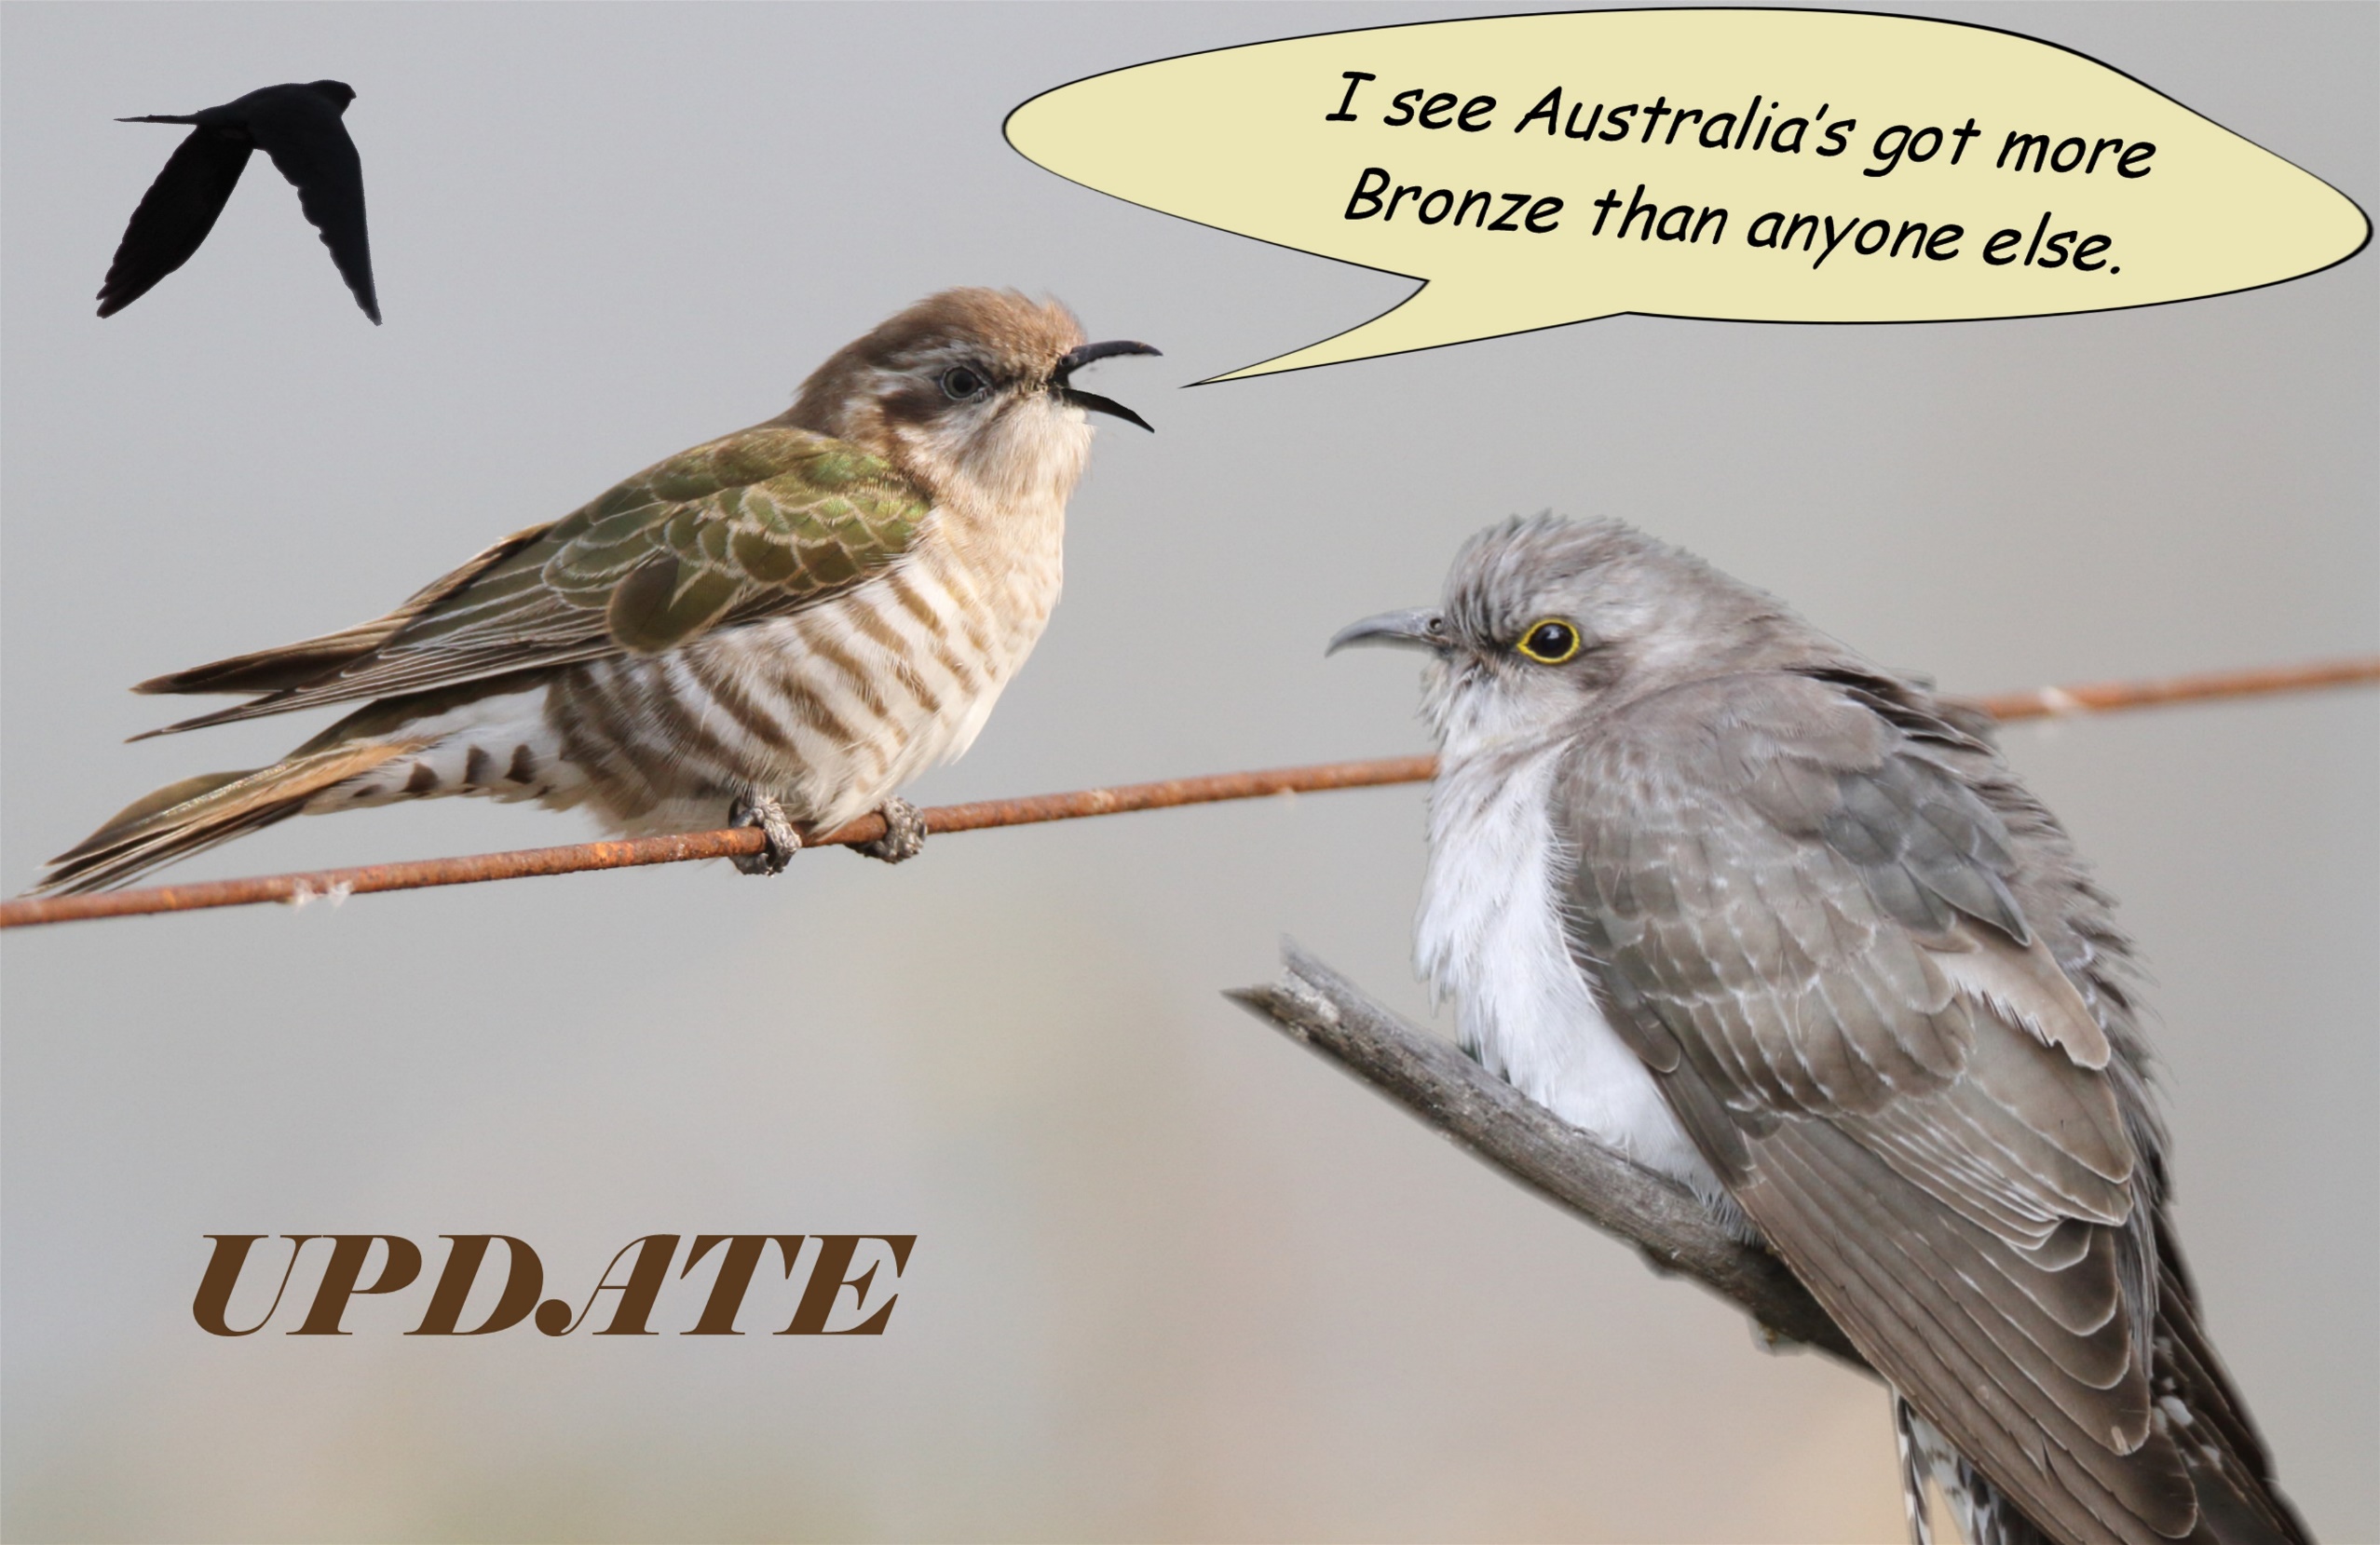 A couple of birds on a branch

Description automatically generated with medium confidence